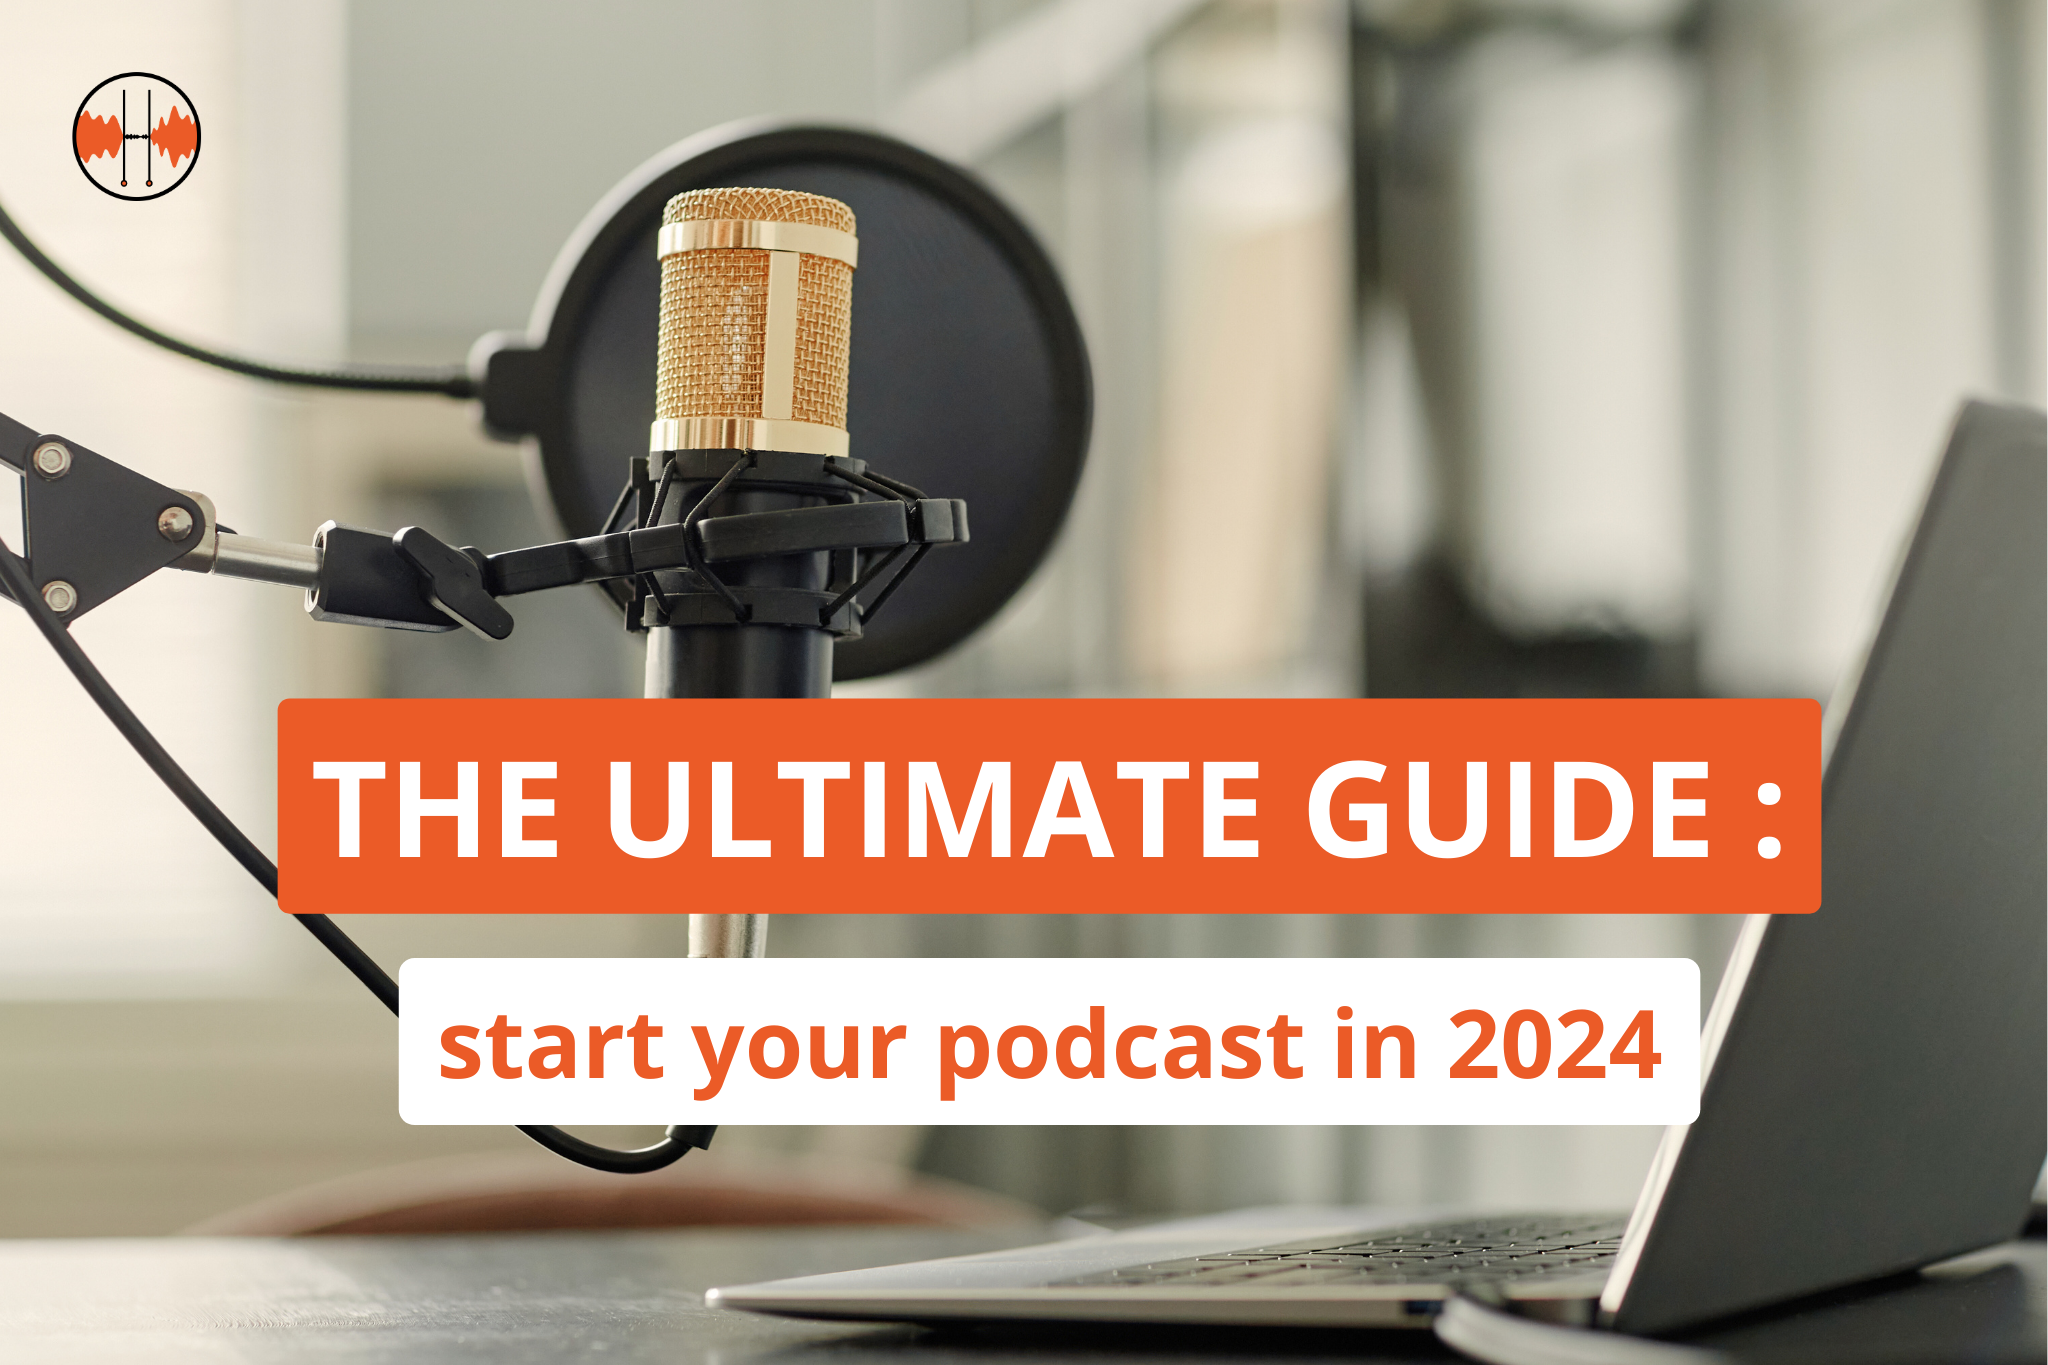 The ultimate guide to start your podcast (2024)